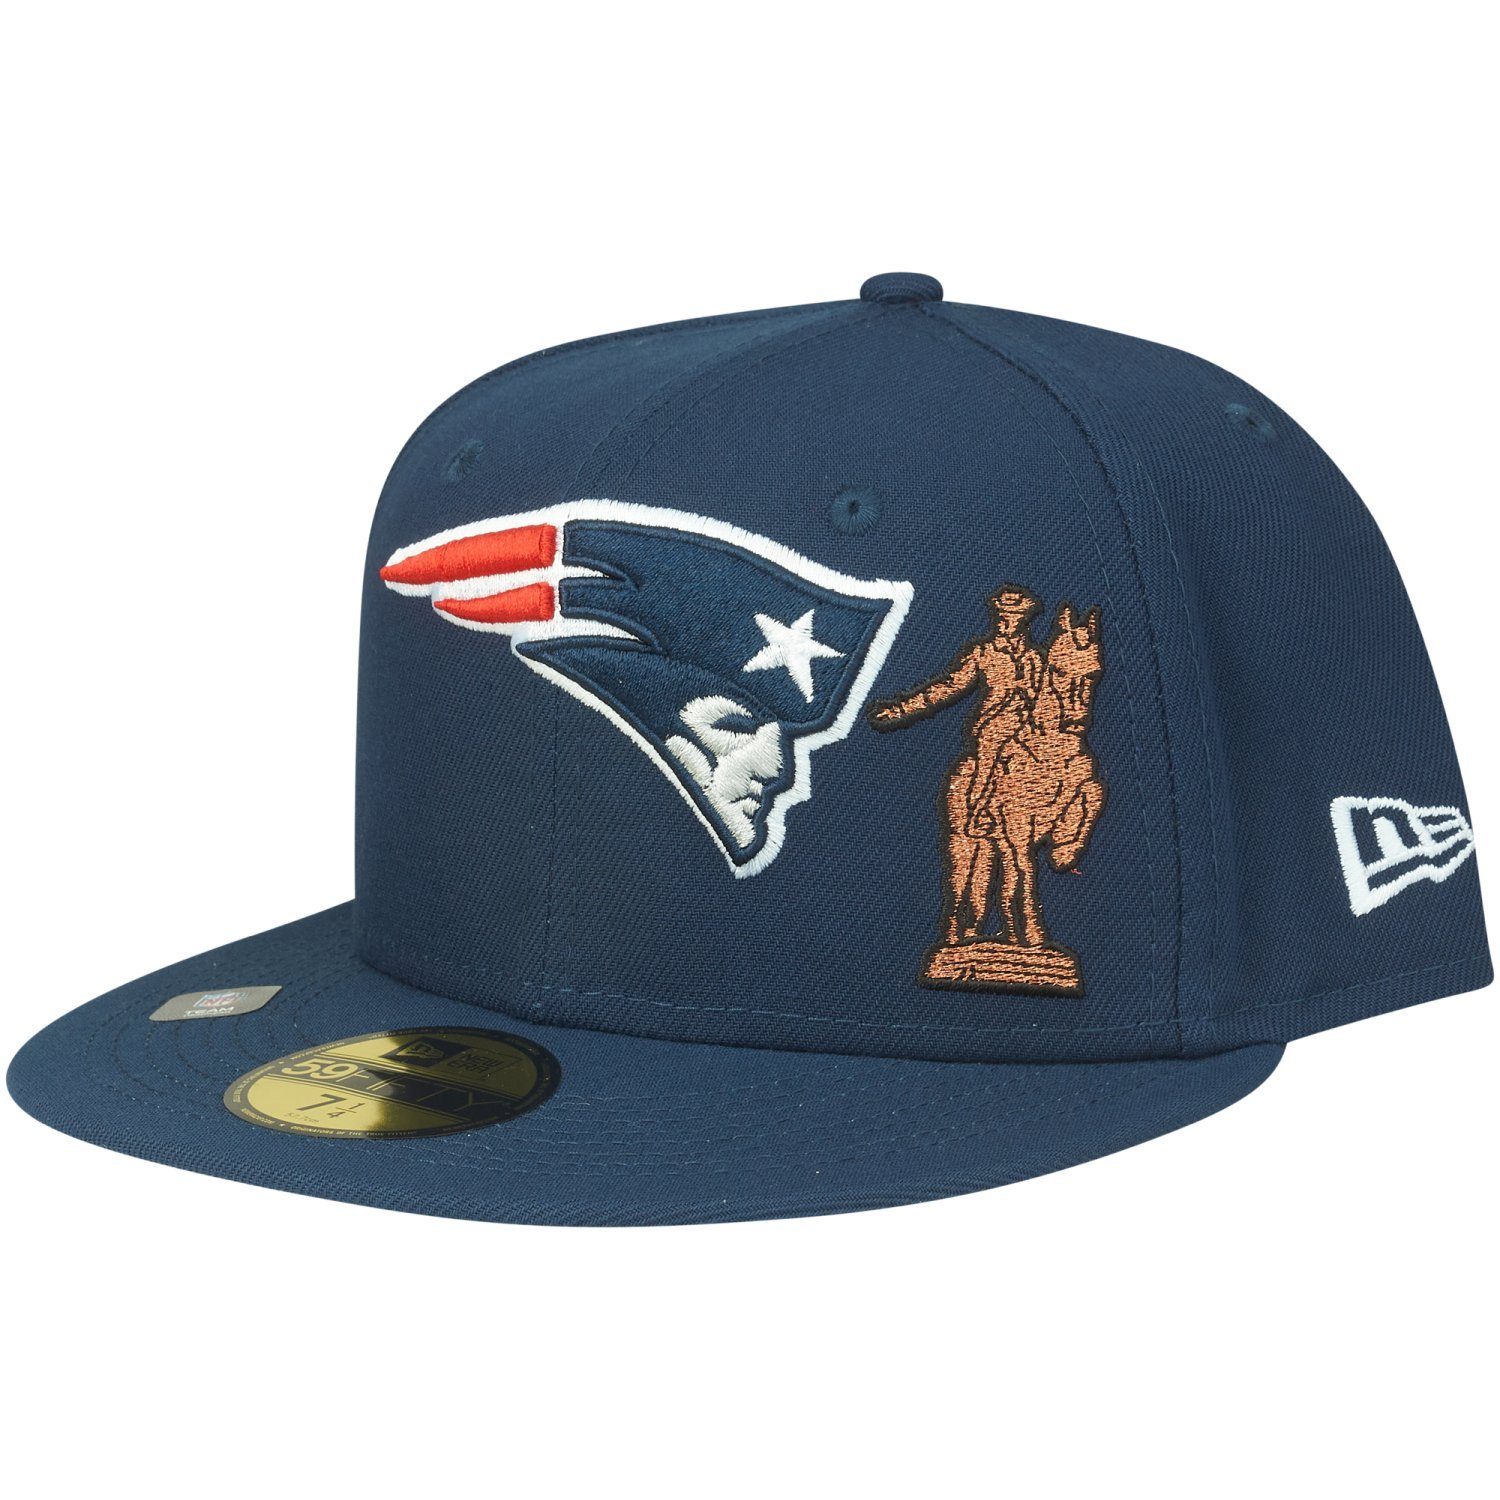 New Era Fitted Cap 59Fifty NFL CITY New England Patriots